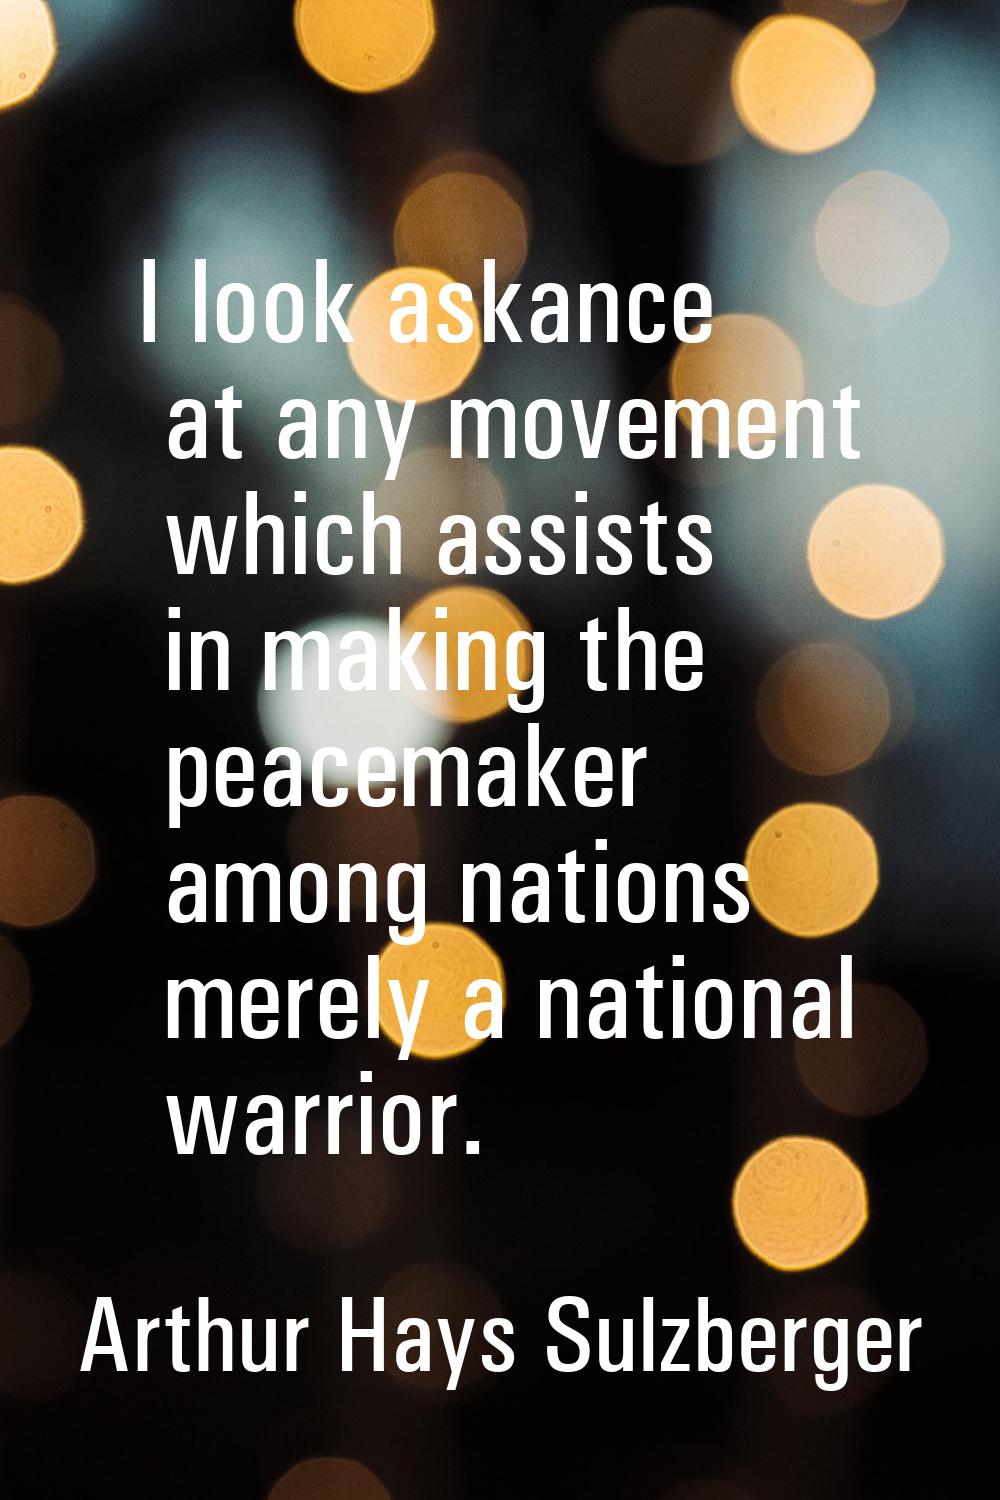 I look askance at any movement which assists in making the peacemaker among nations merely a nation